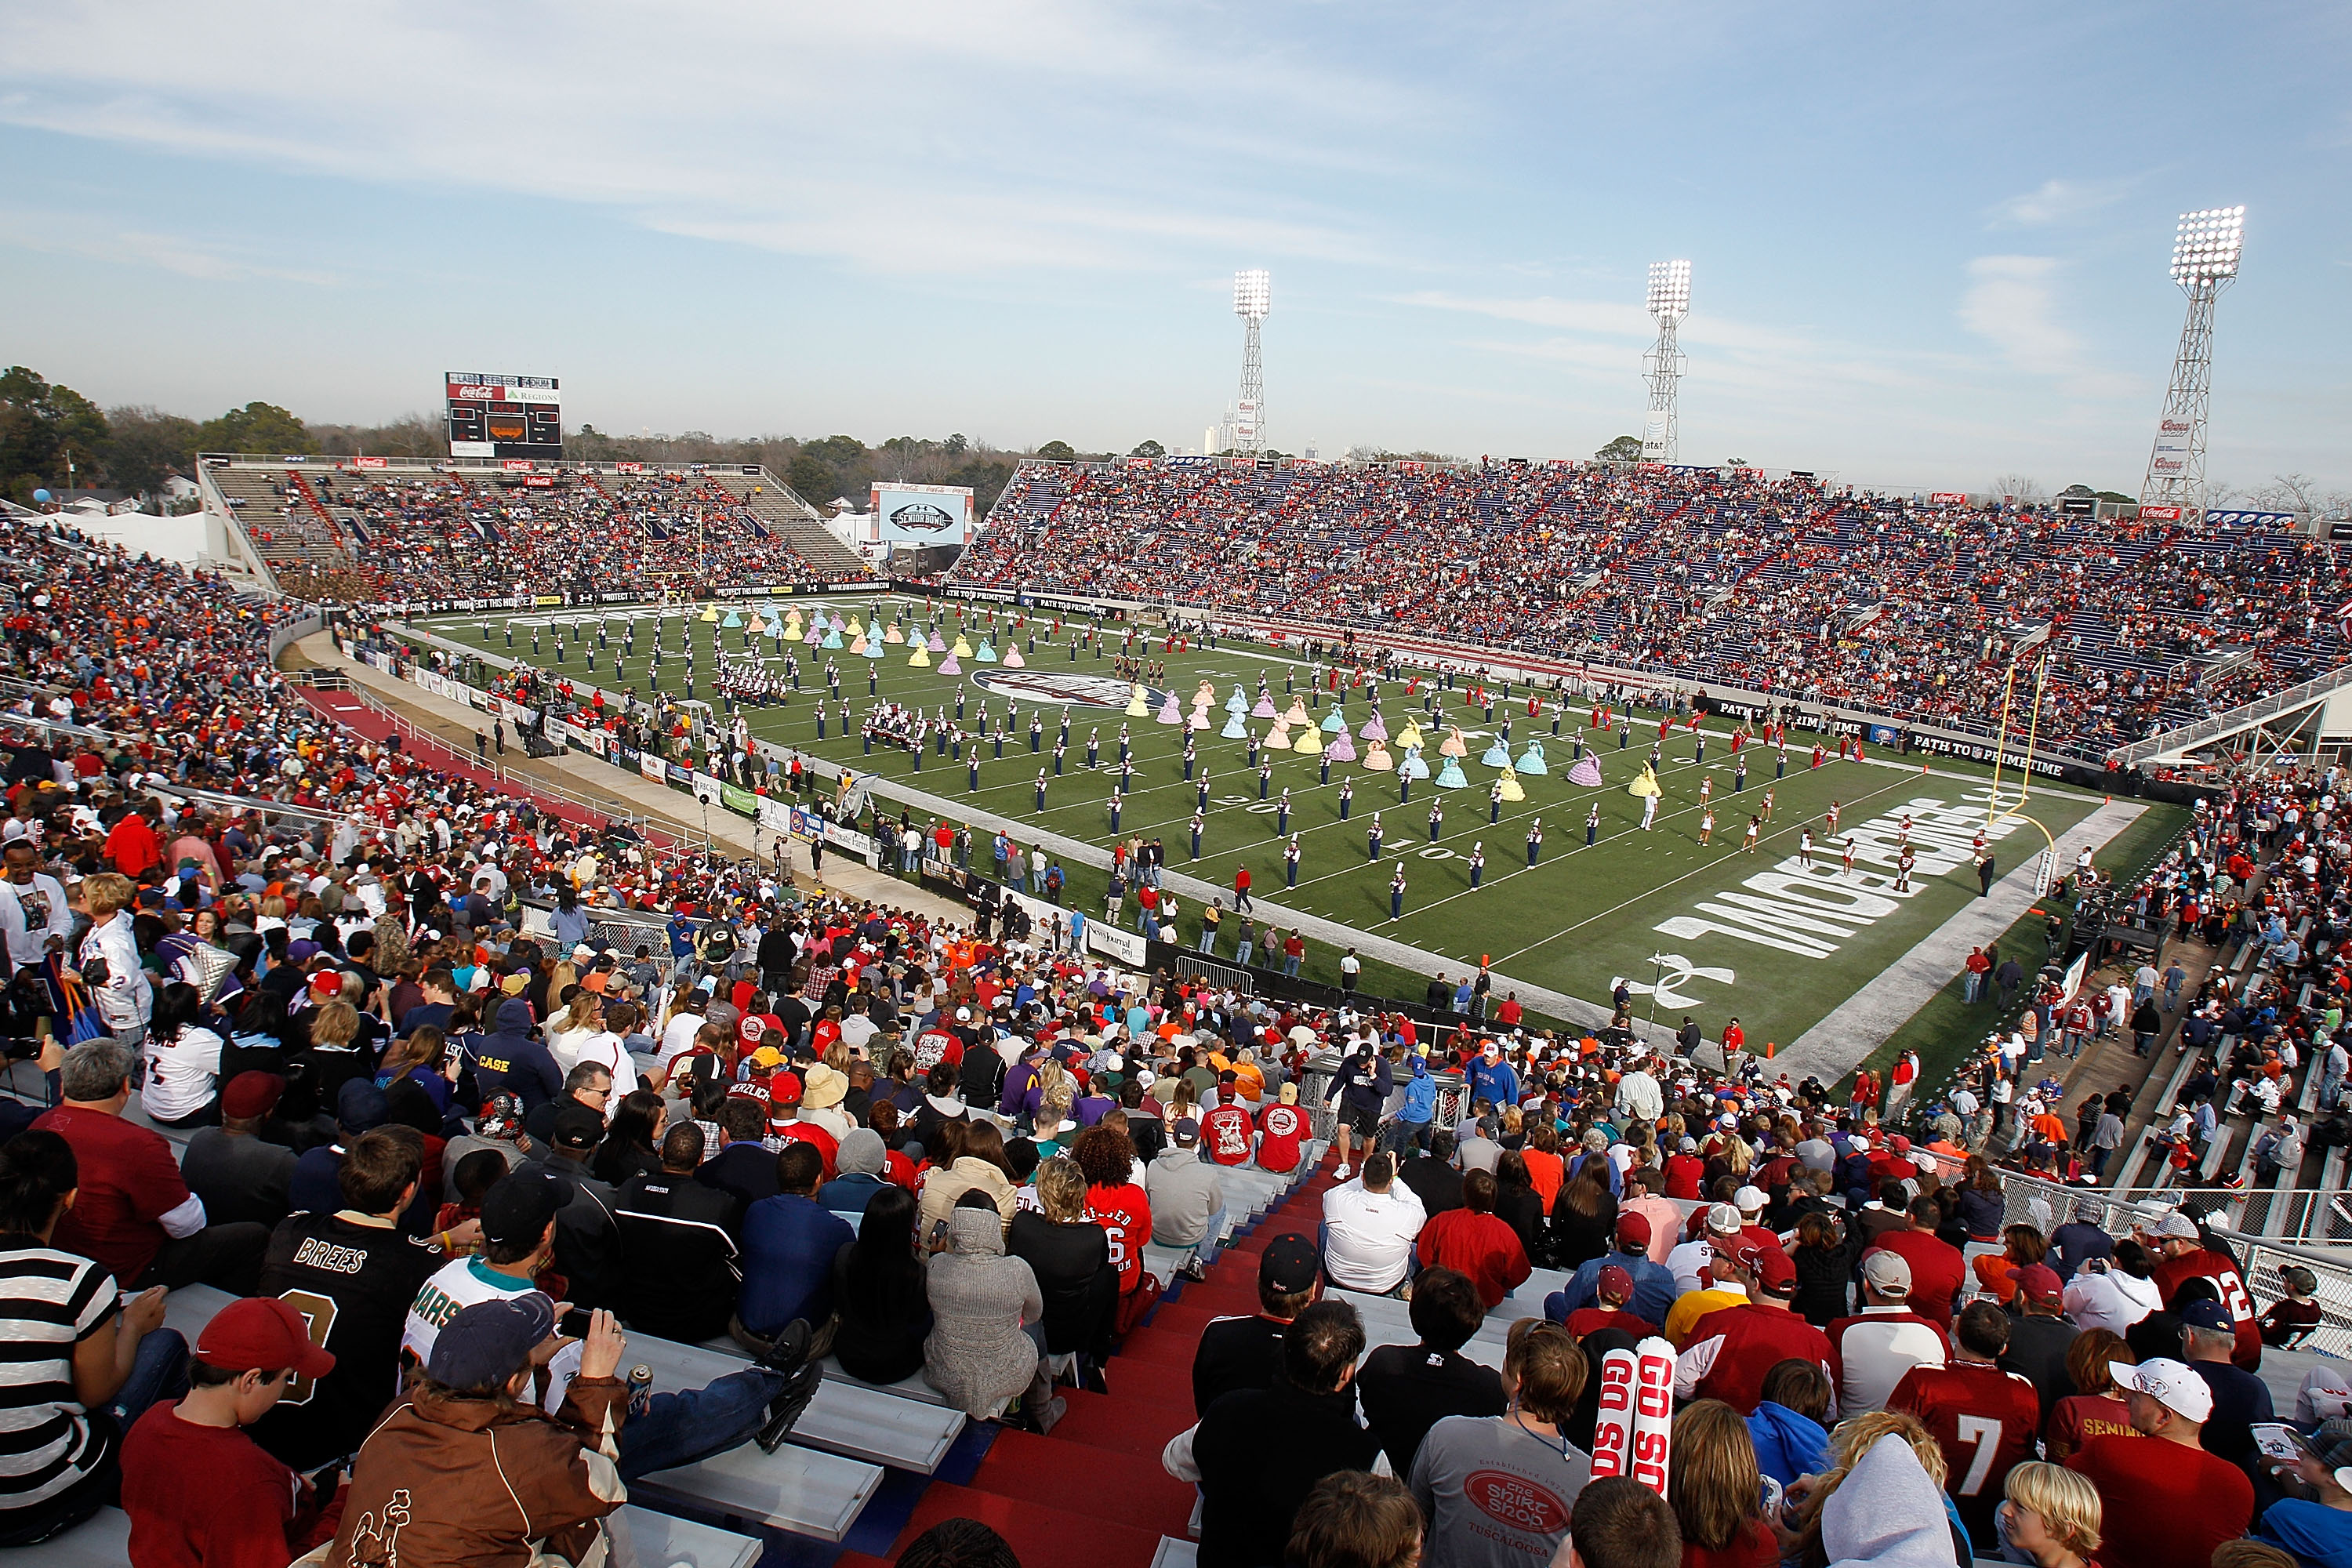 MOBILE, AL - JANUARY 29:Opening ceremonies during  the Under Armour Senior Bowl on January 29, 2011 at Ladd-Pebbles Stadium in Mobile, Alabama. (Photo by Sean Gardner/Getty Images for Under Armour)